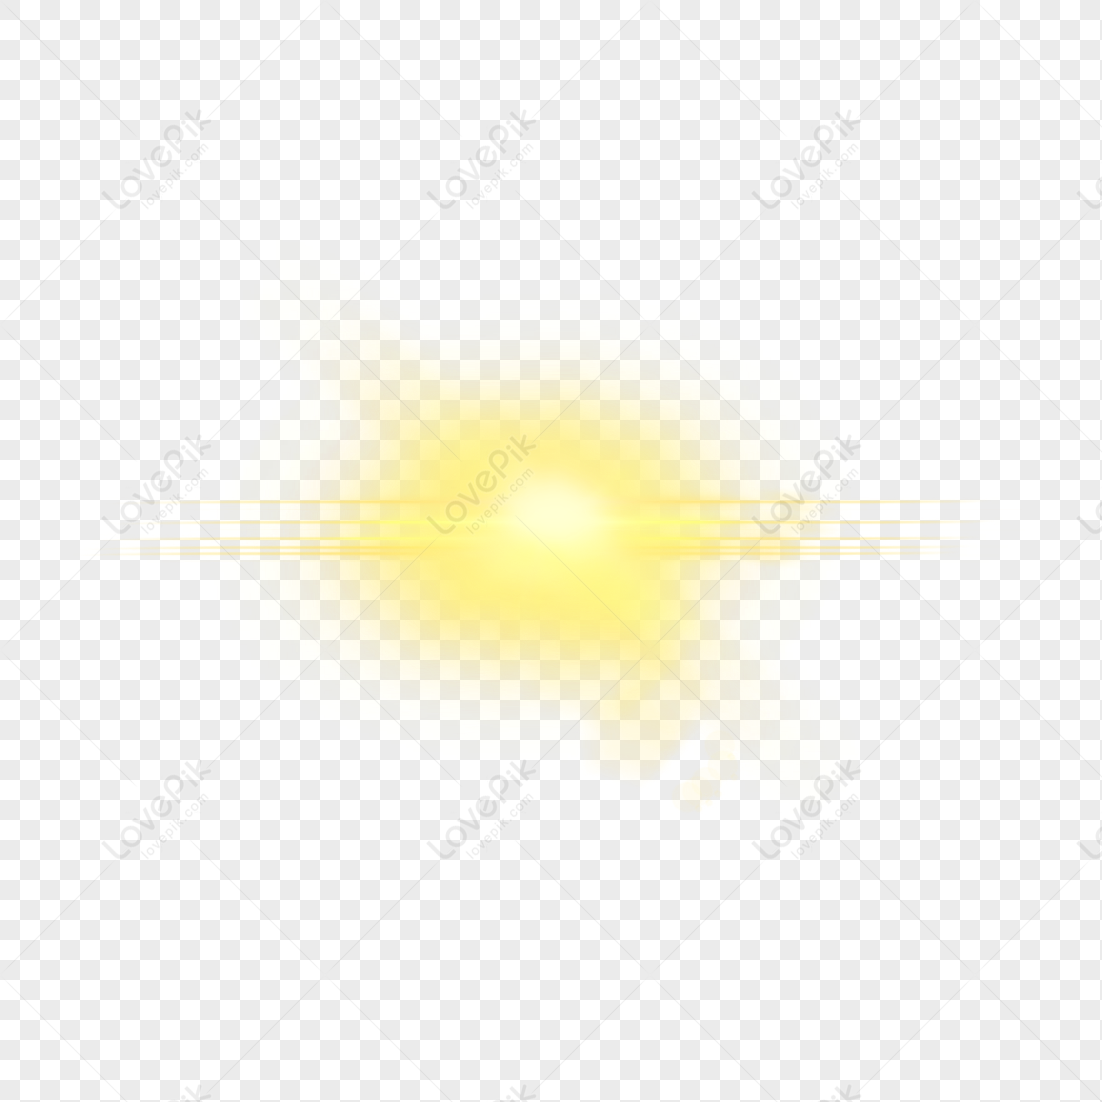 Golden Light PNG Images With Transparent Background | Free ...